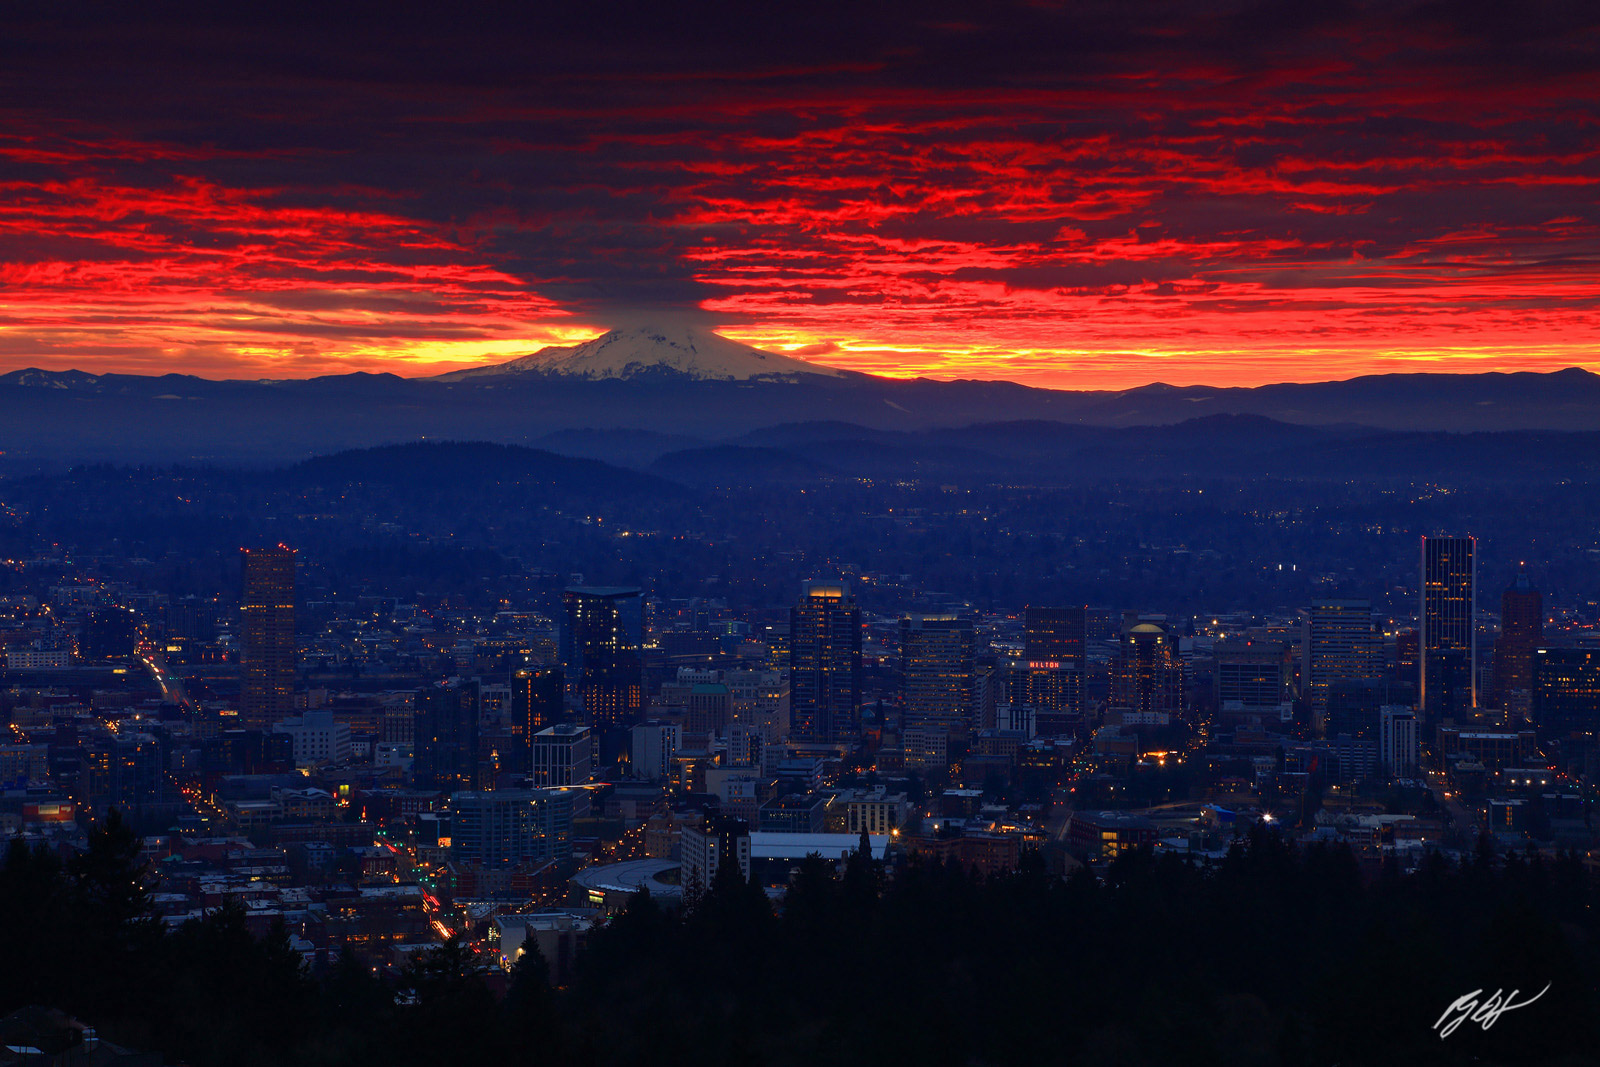 Sunrise over Portland and Mt Hood from the Pittock Mansion in Portland Oregon